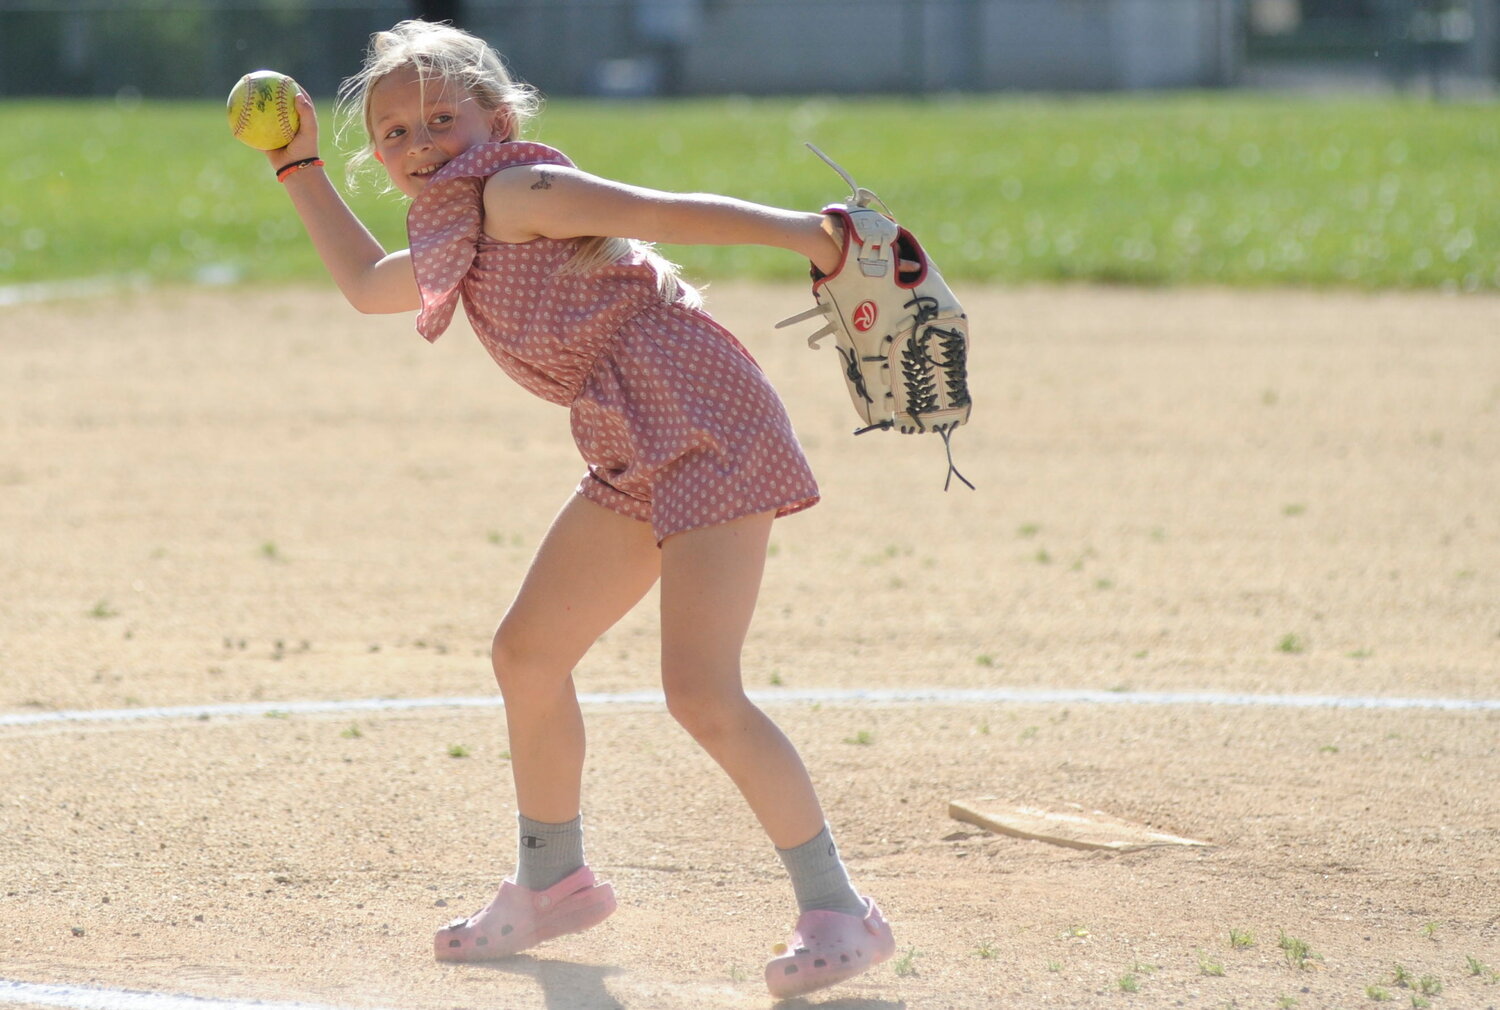 Lady Bulldogs softball team co-manager, 10-year-old Kenzie Knapp, is a fourth-grader at the elementary school. She is pictured helping her team warm up before the game against S.S. Seward. She plays travel ball, and at school during games wears jersey #75...